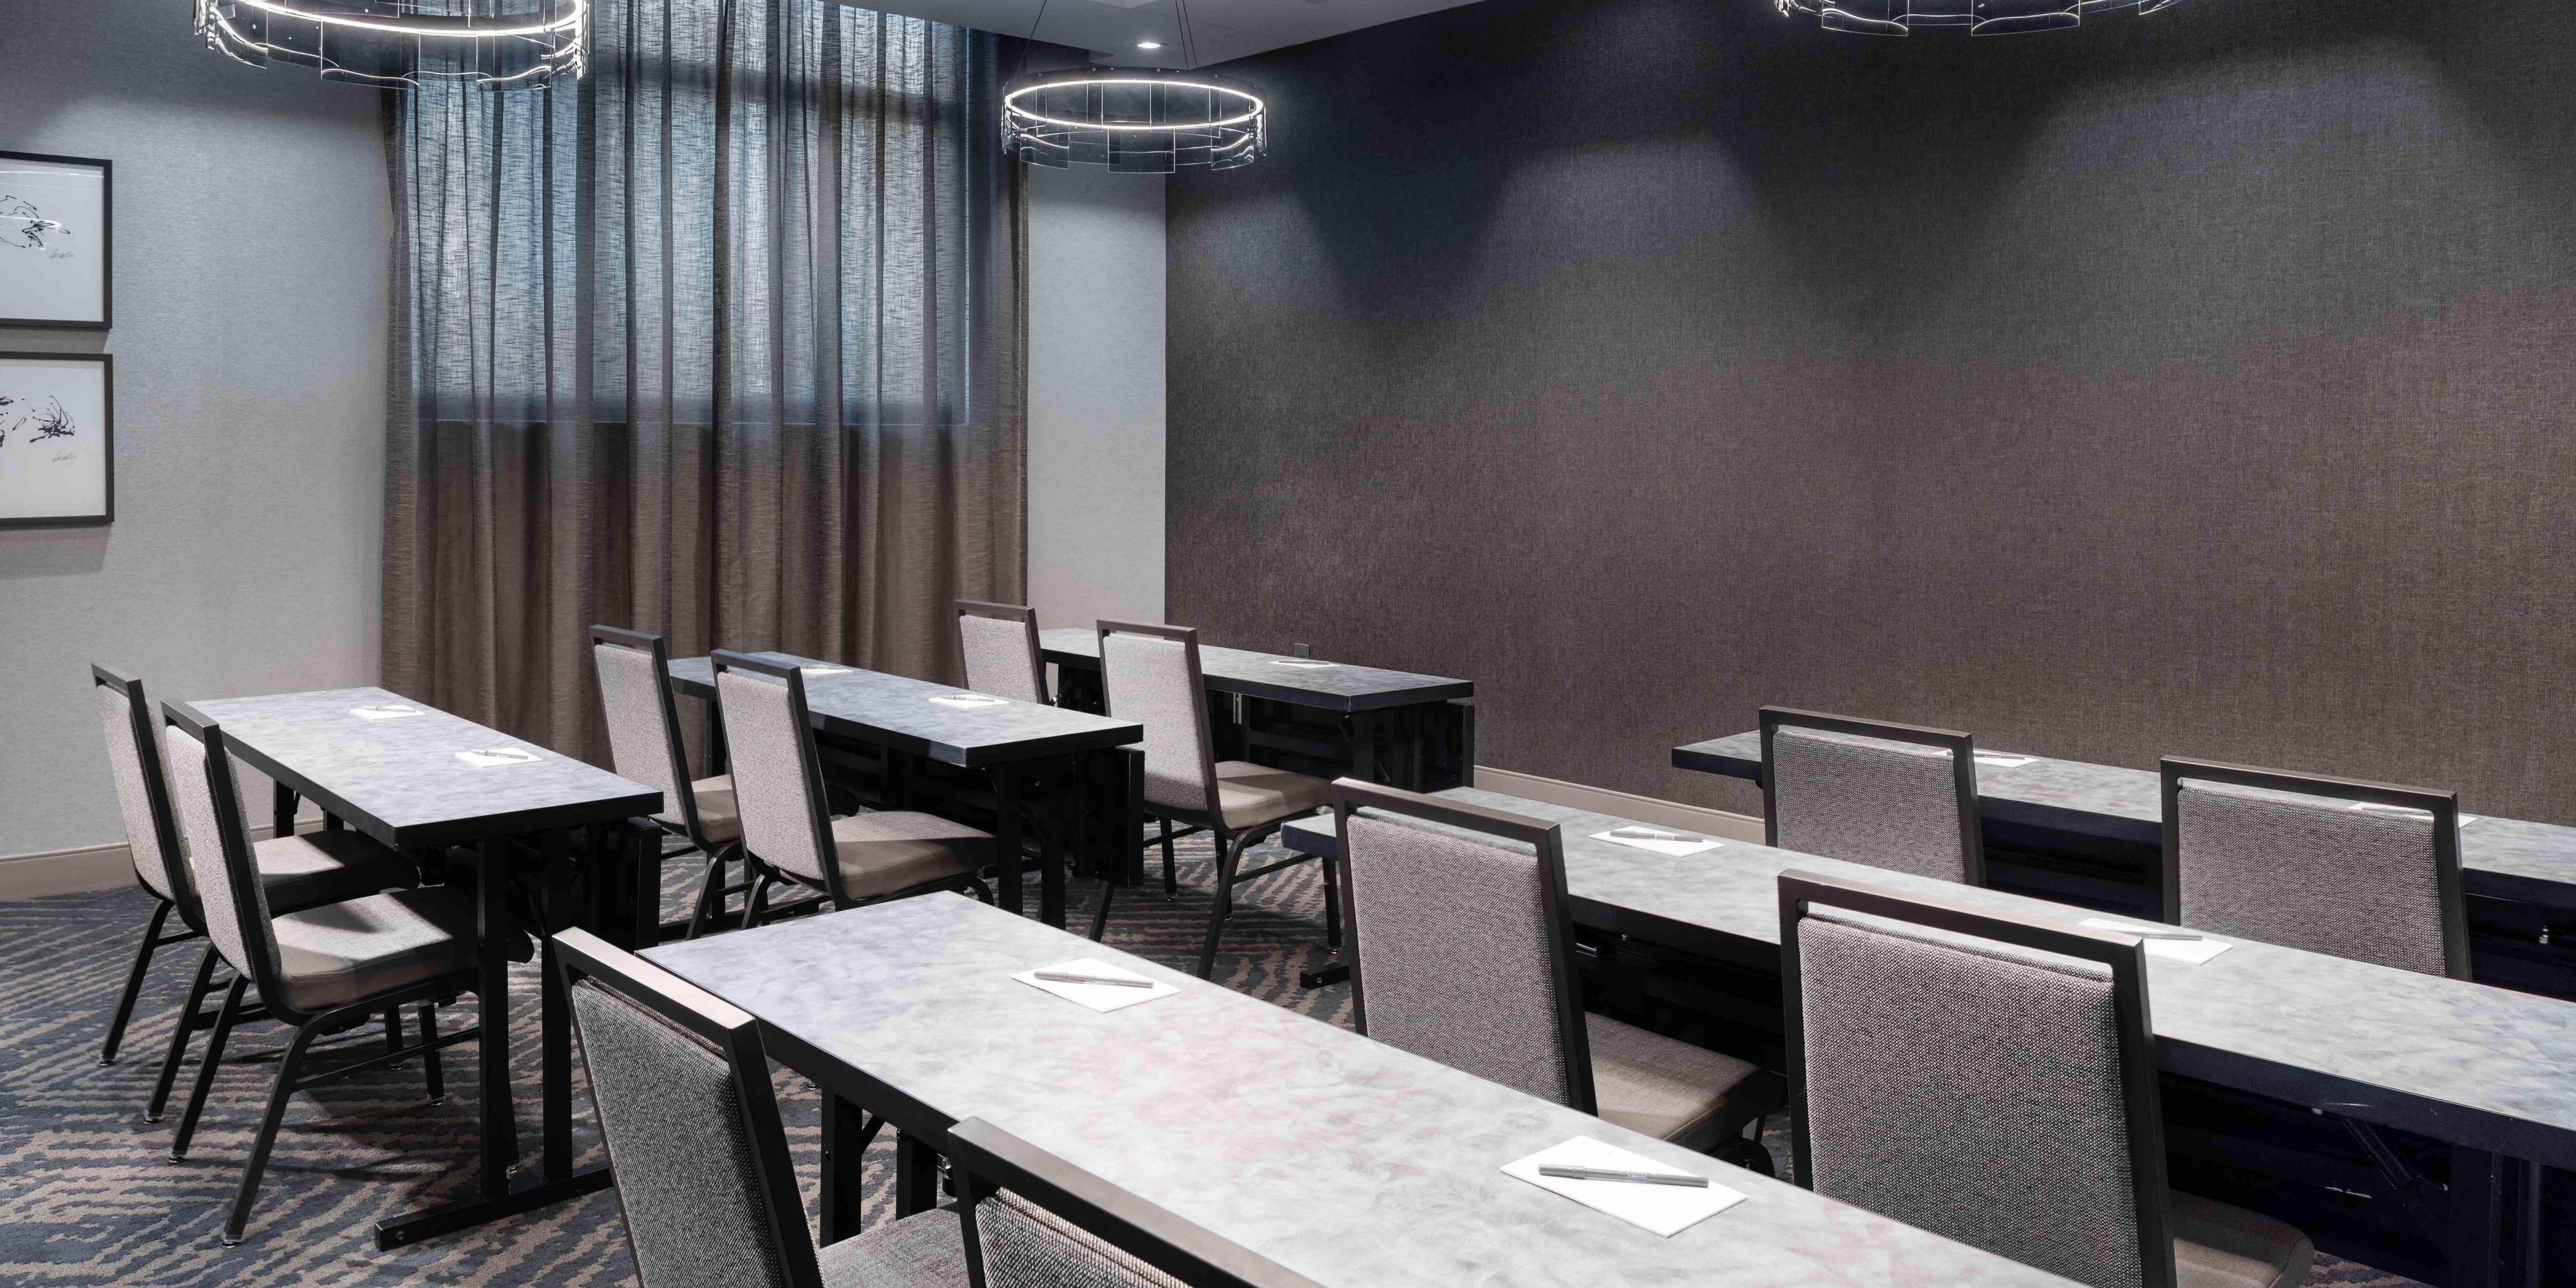 Plan your next meeting in our stylish venue - our onsite team is ready to help you plan!